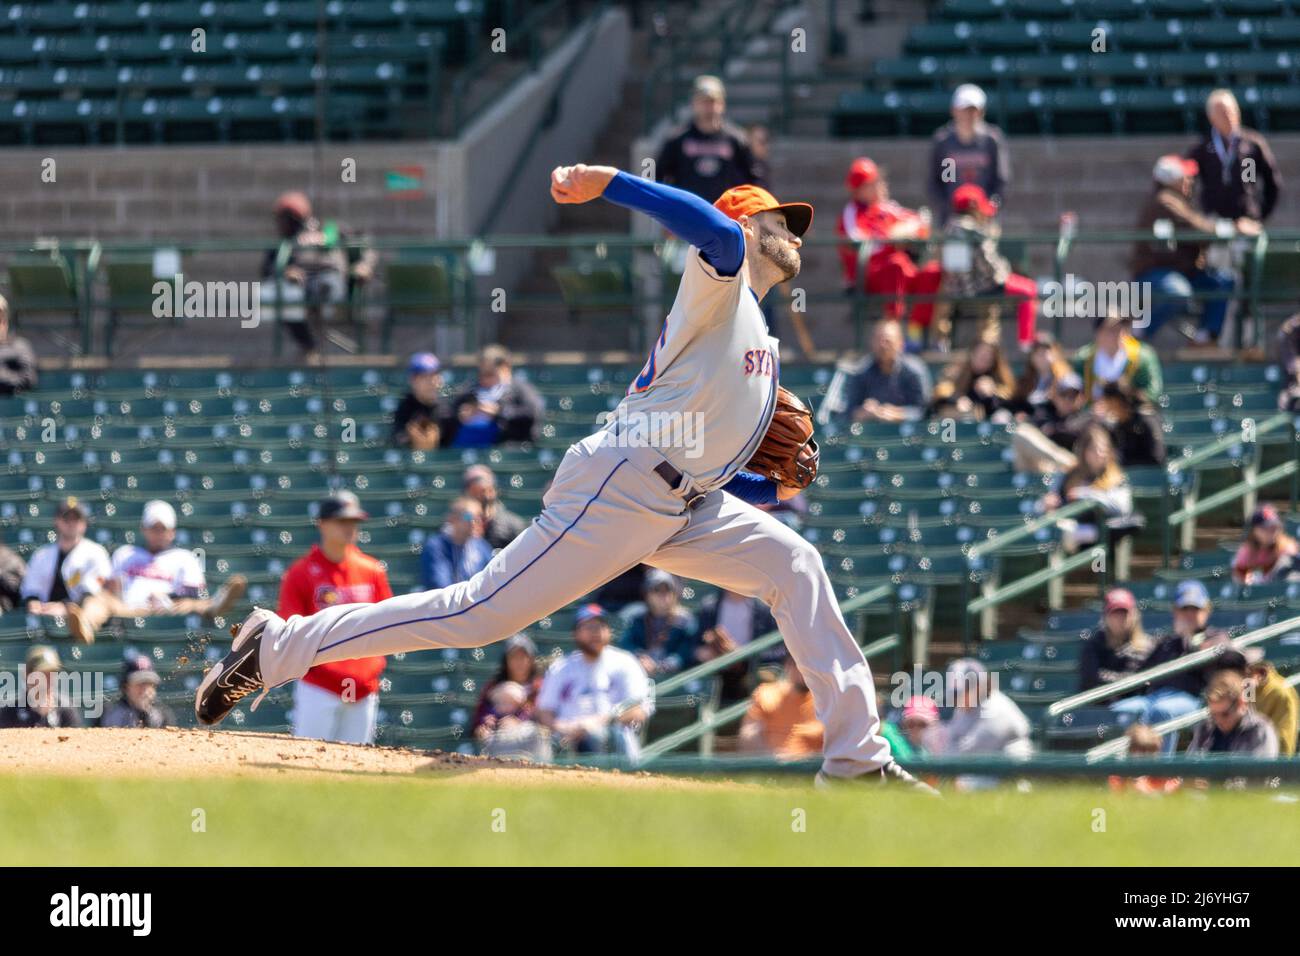 April 30, 2022: Syracuse Mets pitcher Tim Adleman (40) throws a pitch in a game against the Rochester Red Wings. The Rochester Red Wings hosted the Syracuse Mets in the first game of a double header in an International League game at Frontier Field in Rochester, New York. (Jonathan Tenca/CSM) Stock Photo